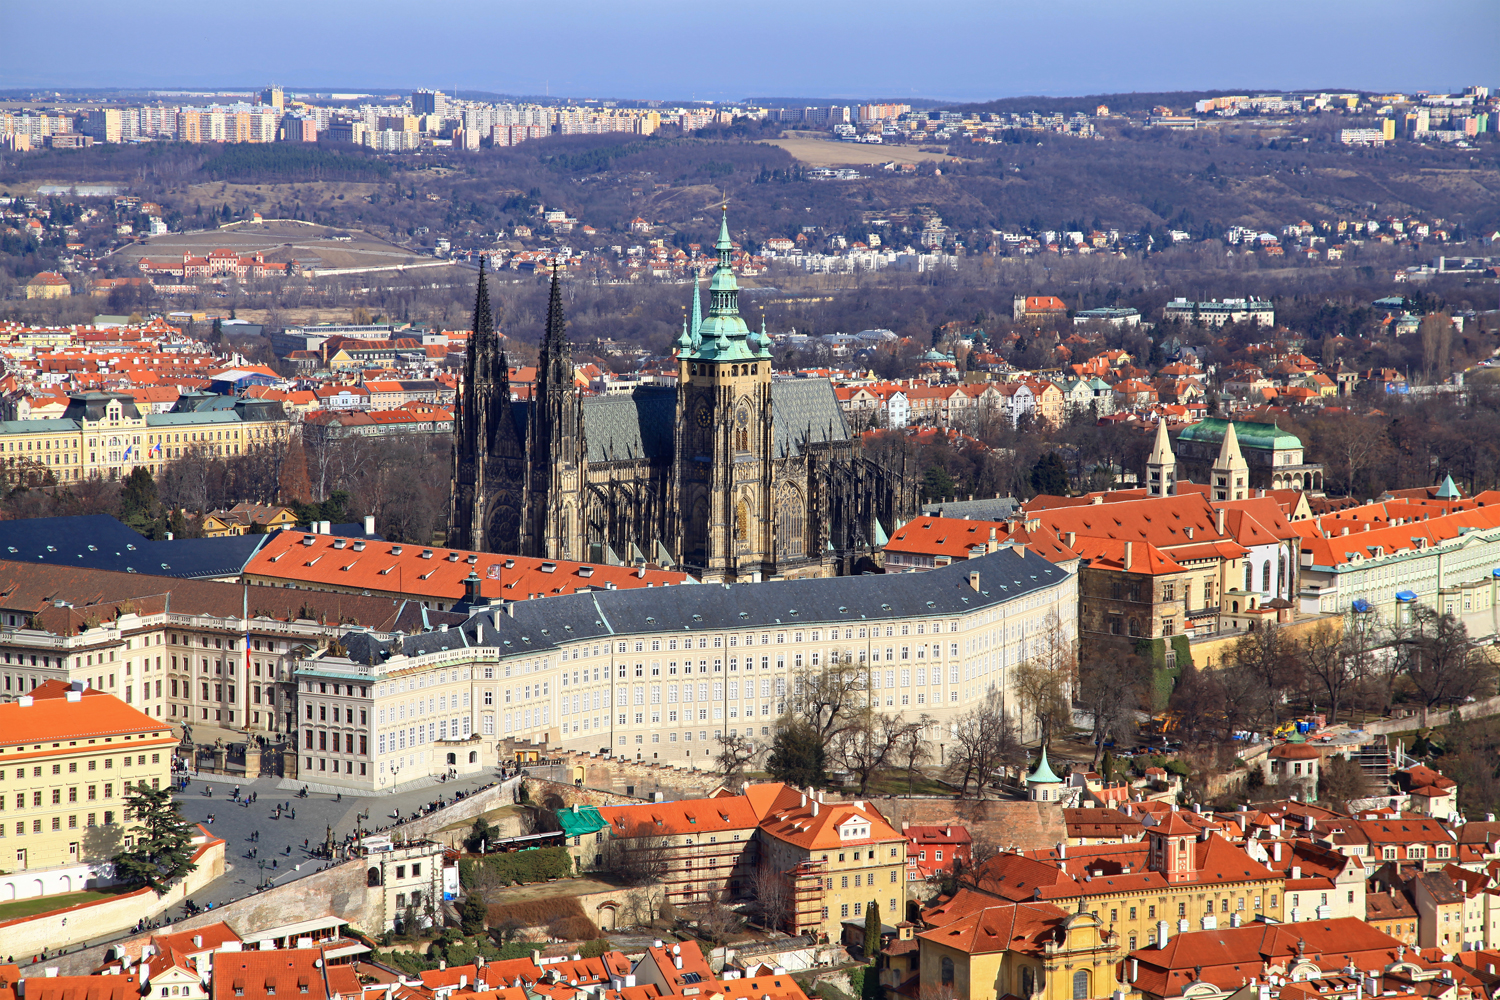 The view of Prague Castle and St. Vitus Cathedral from Petrin Tower.